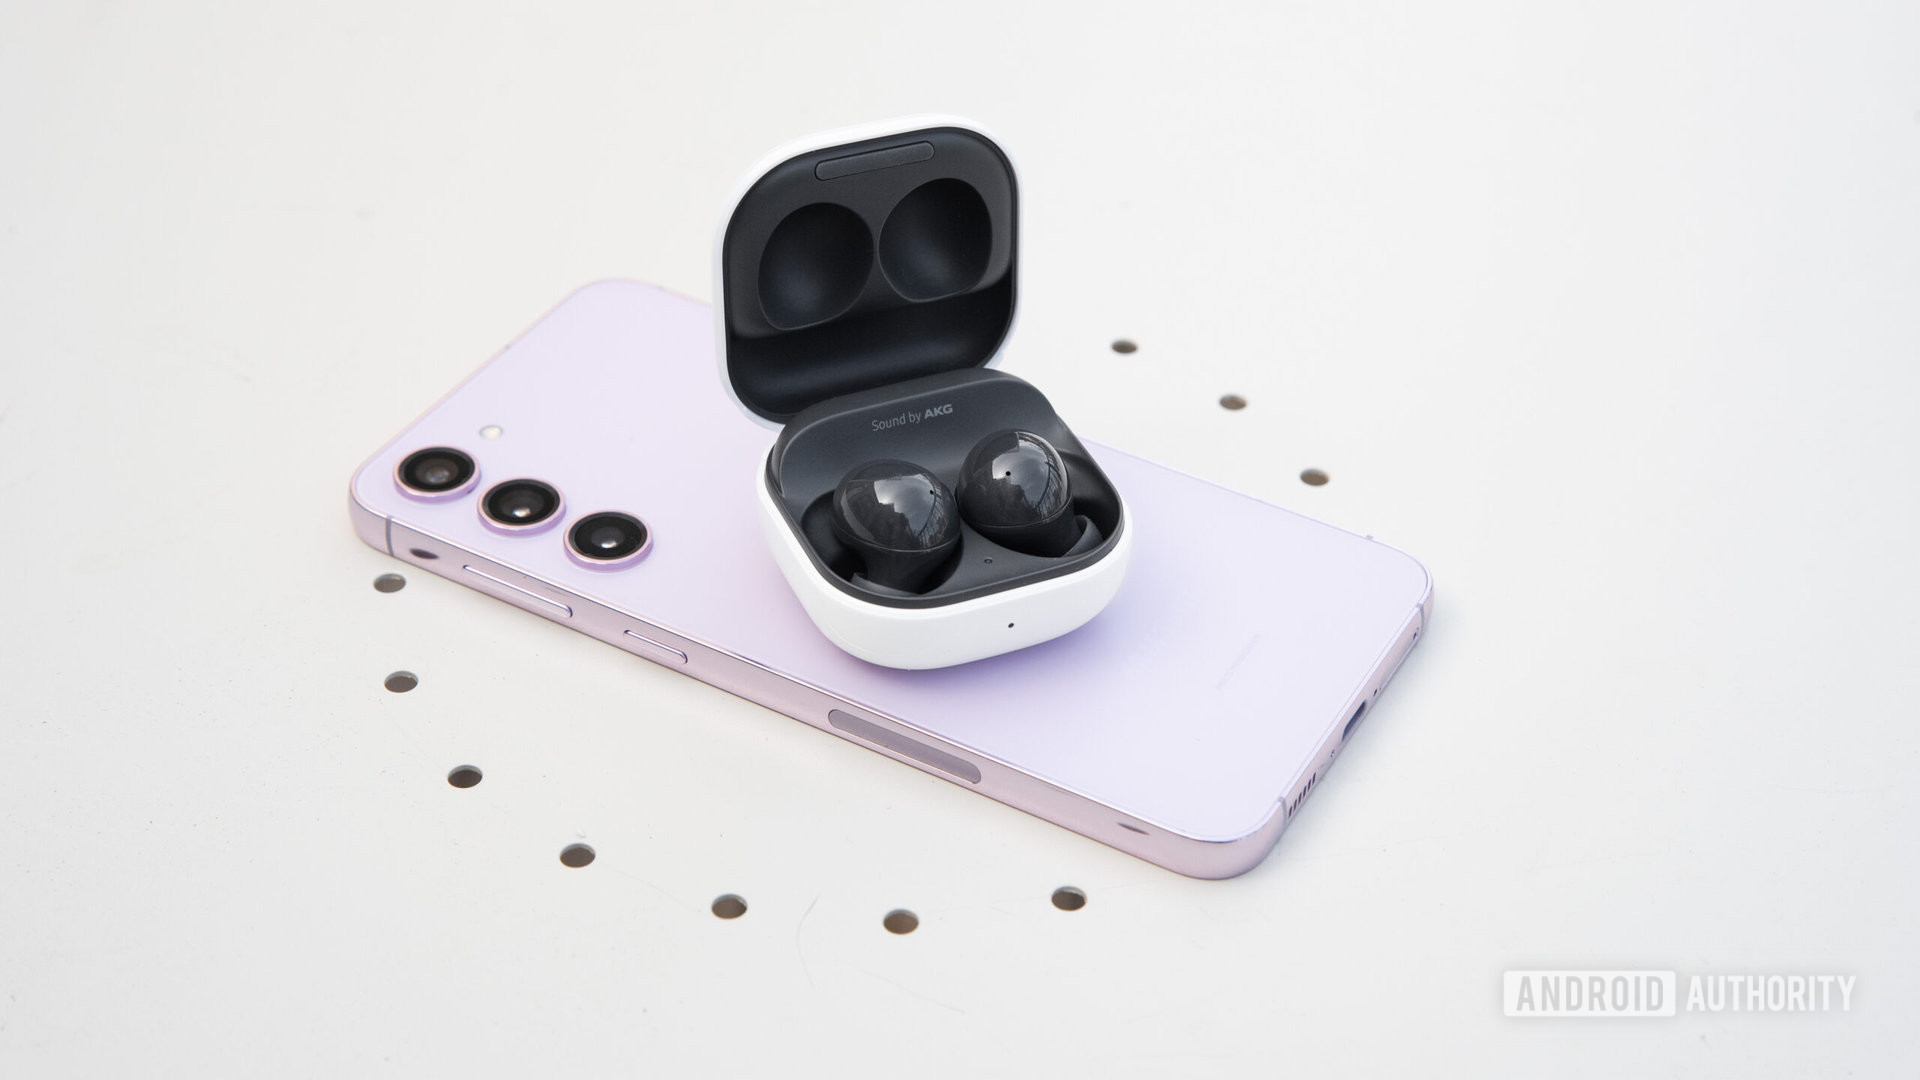 Info leaks on Galaxy Buds 3, but could possibly be a new ‘Fan Edition’ variant